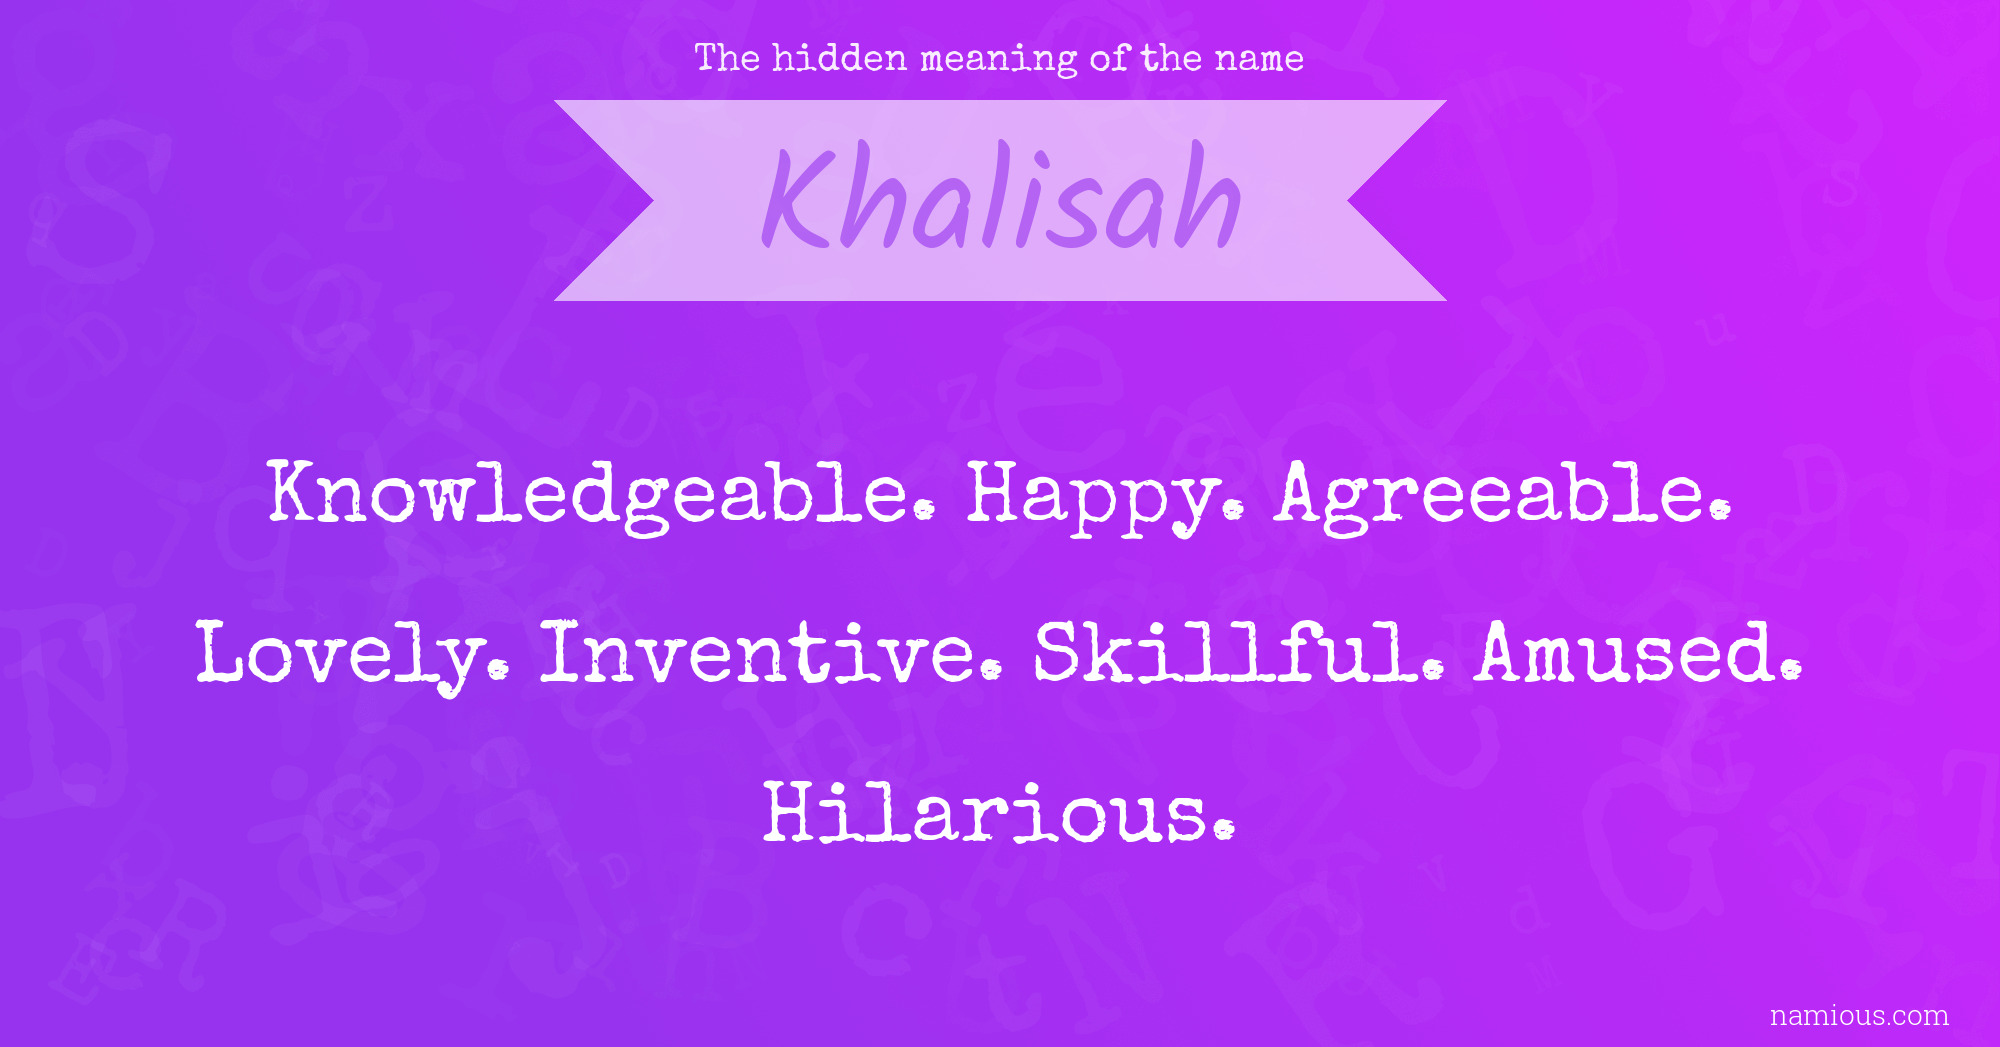 The hidden meaning of the name Khalisah